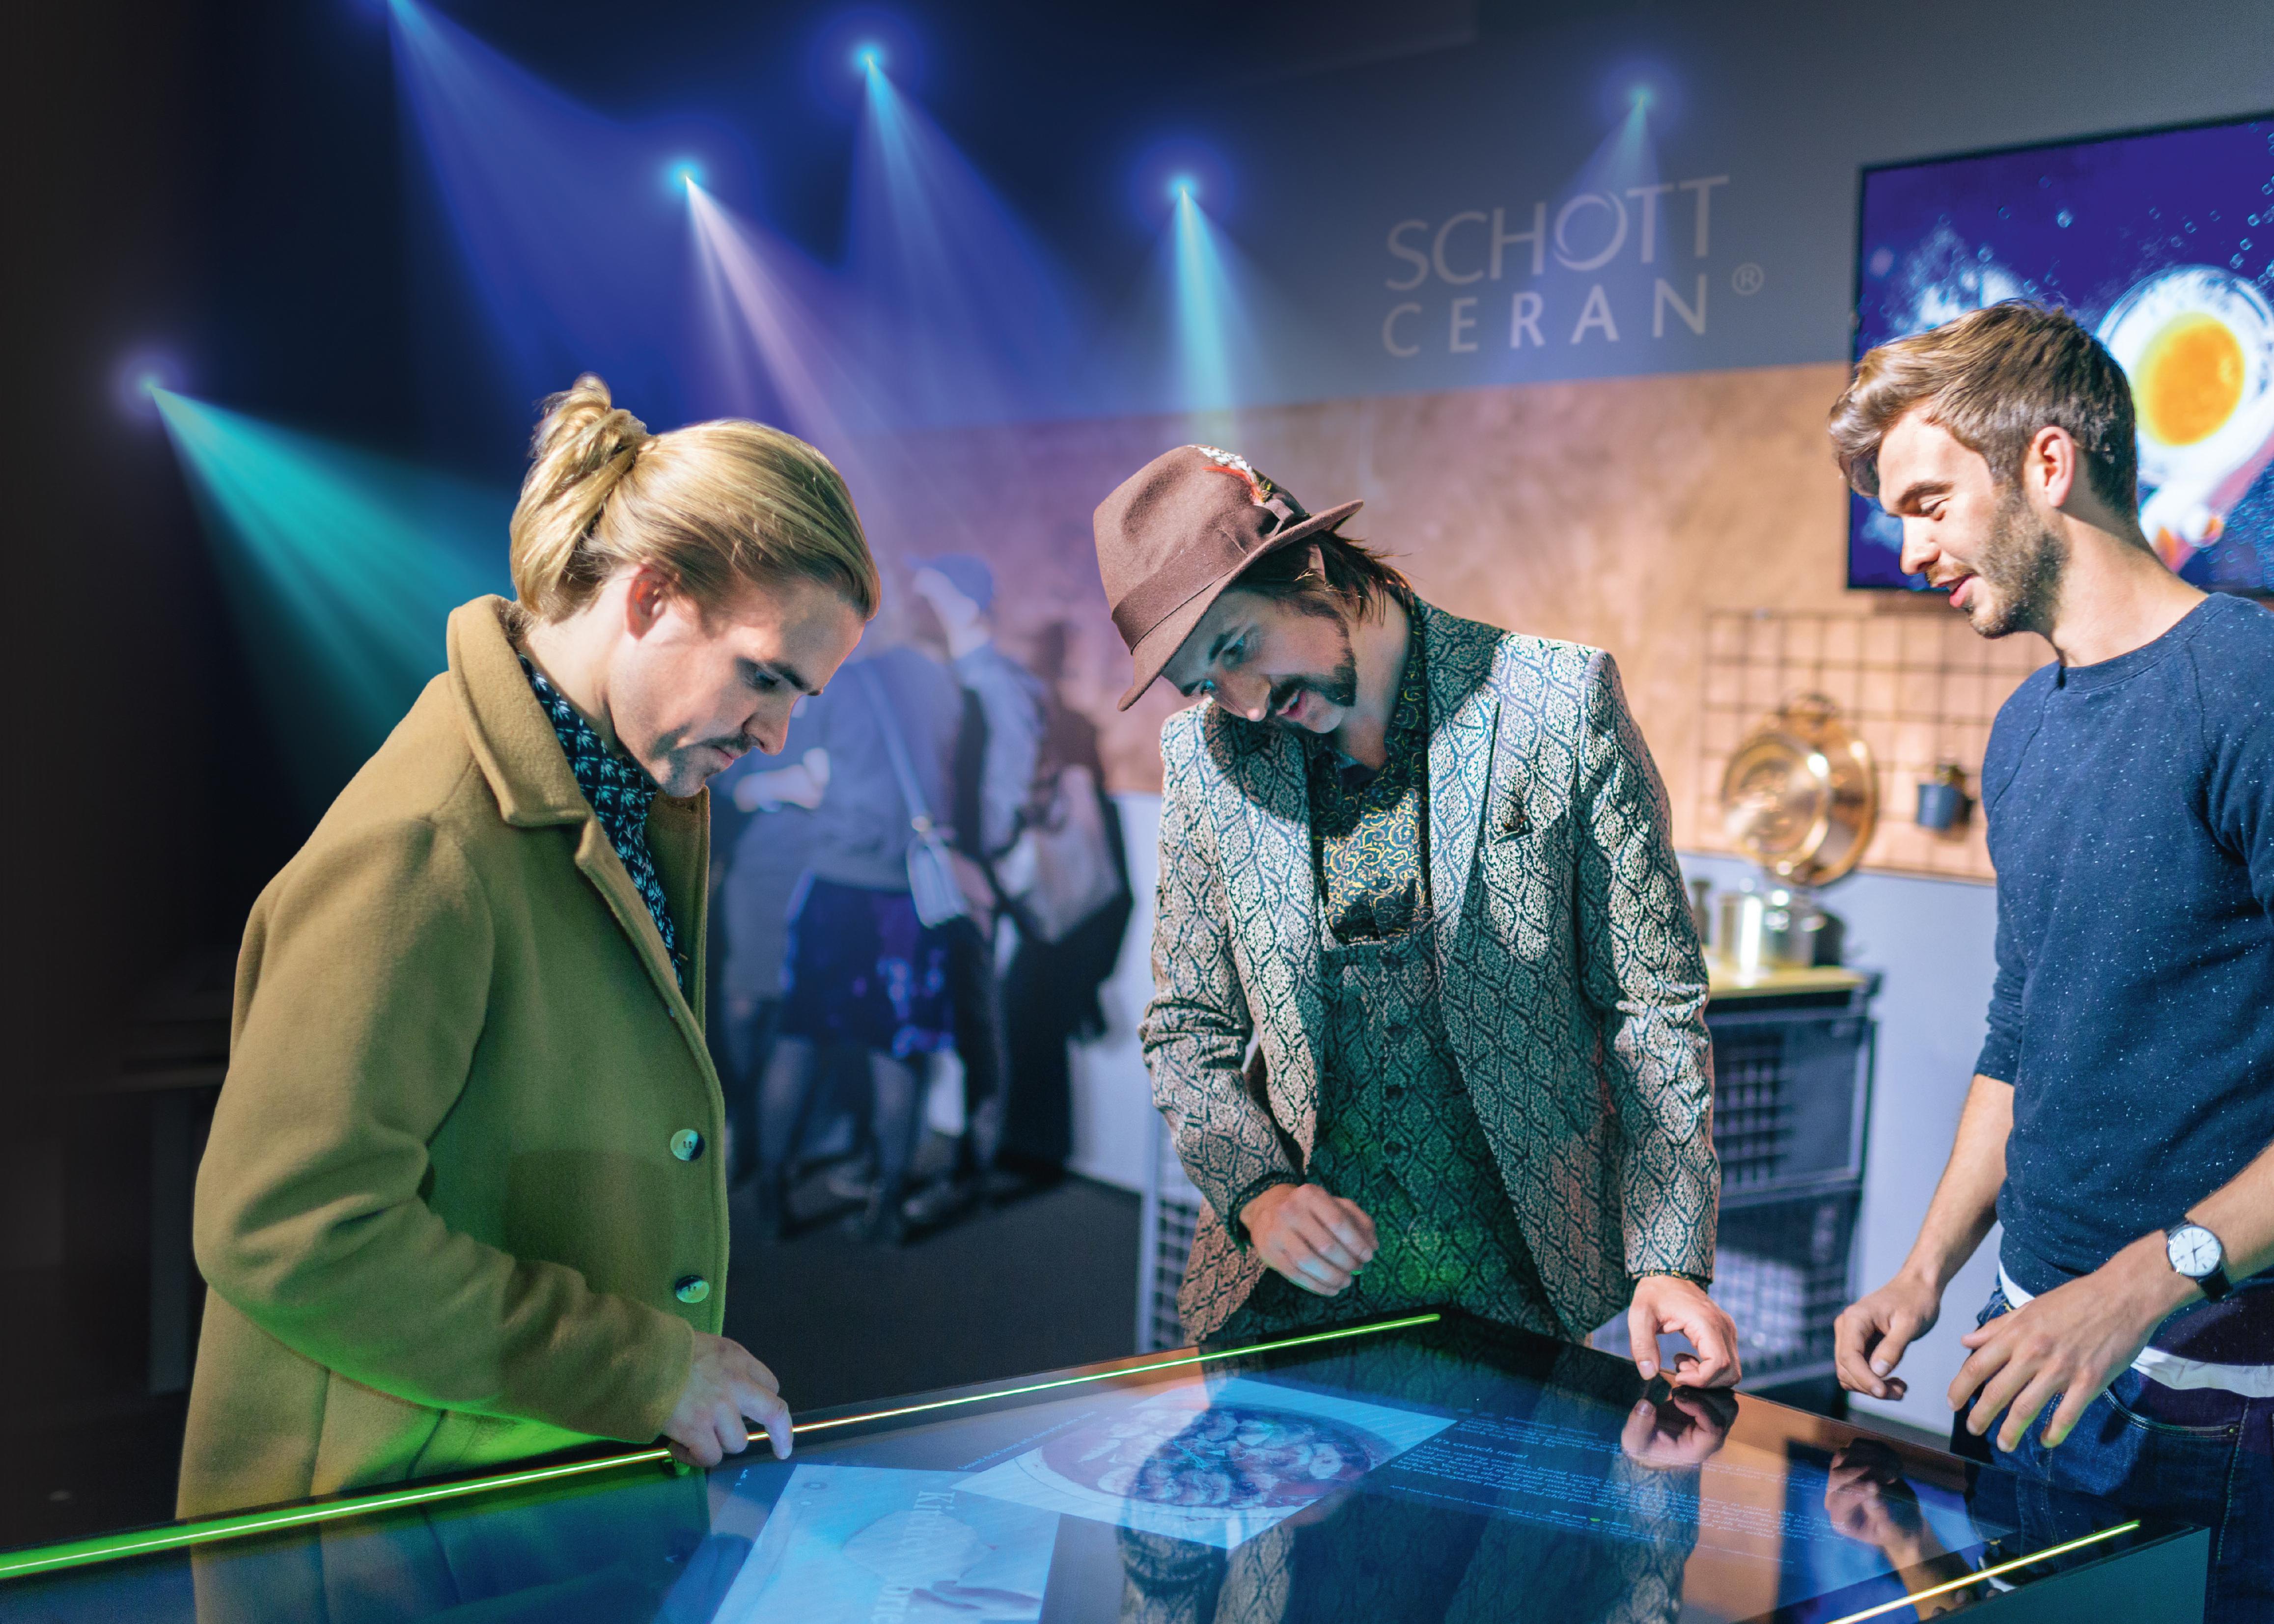 Group of young people looking at a SCHOTT CERAN EXCITE® glass-ceramic cooktop panel at an exhibition